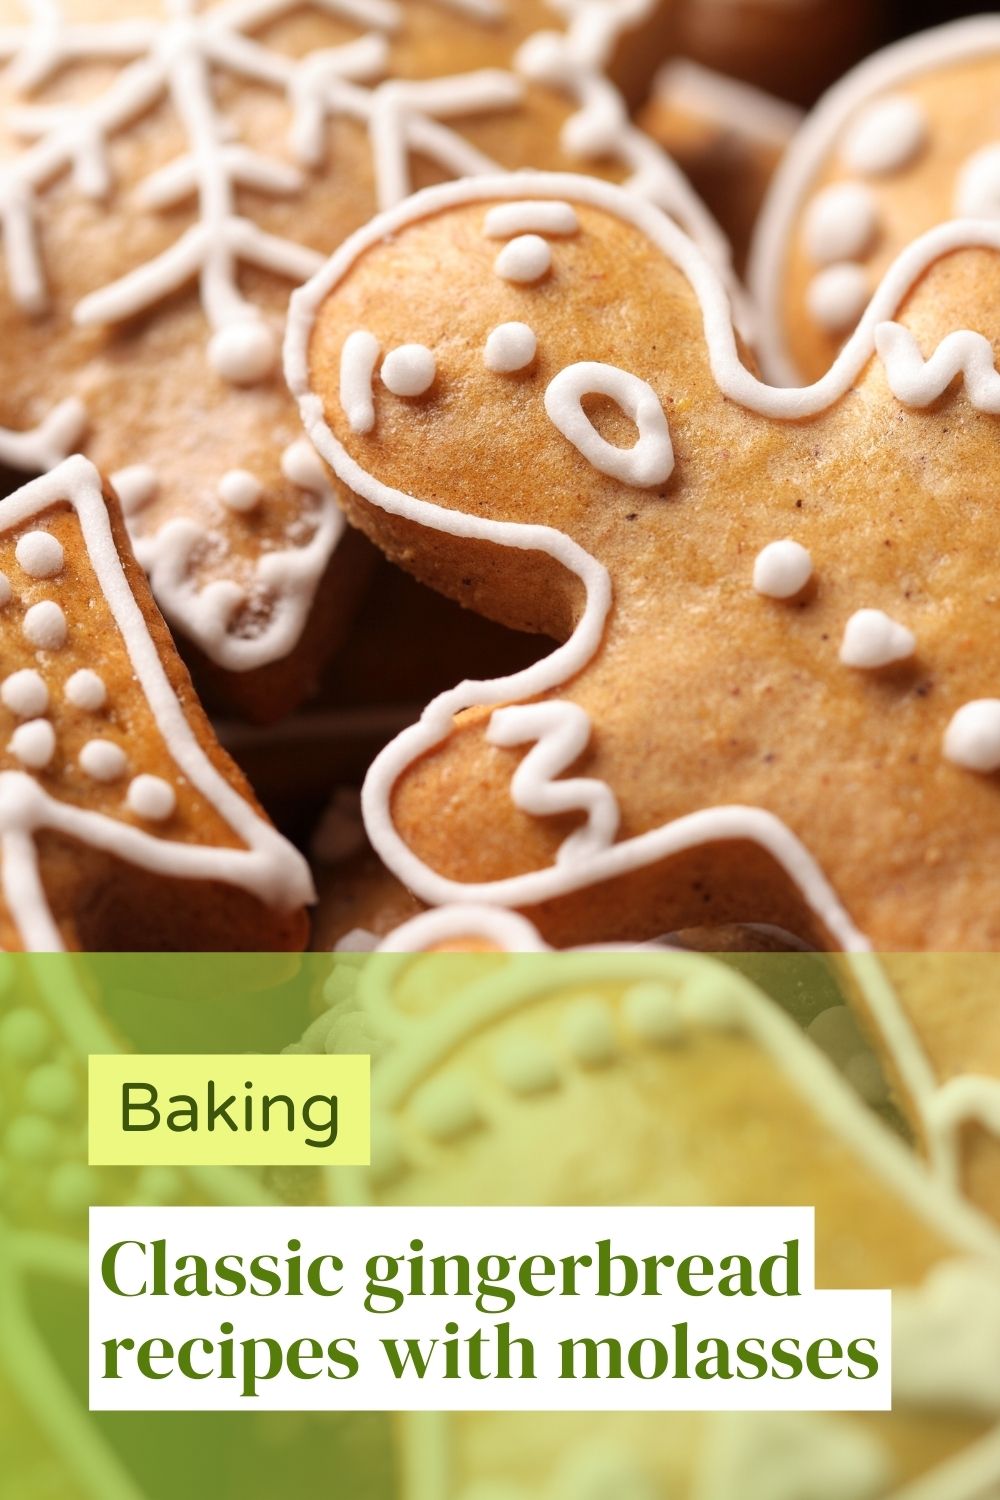 Classic gingerbread recipes with molasses